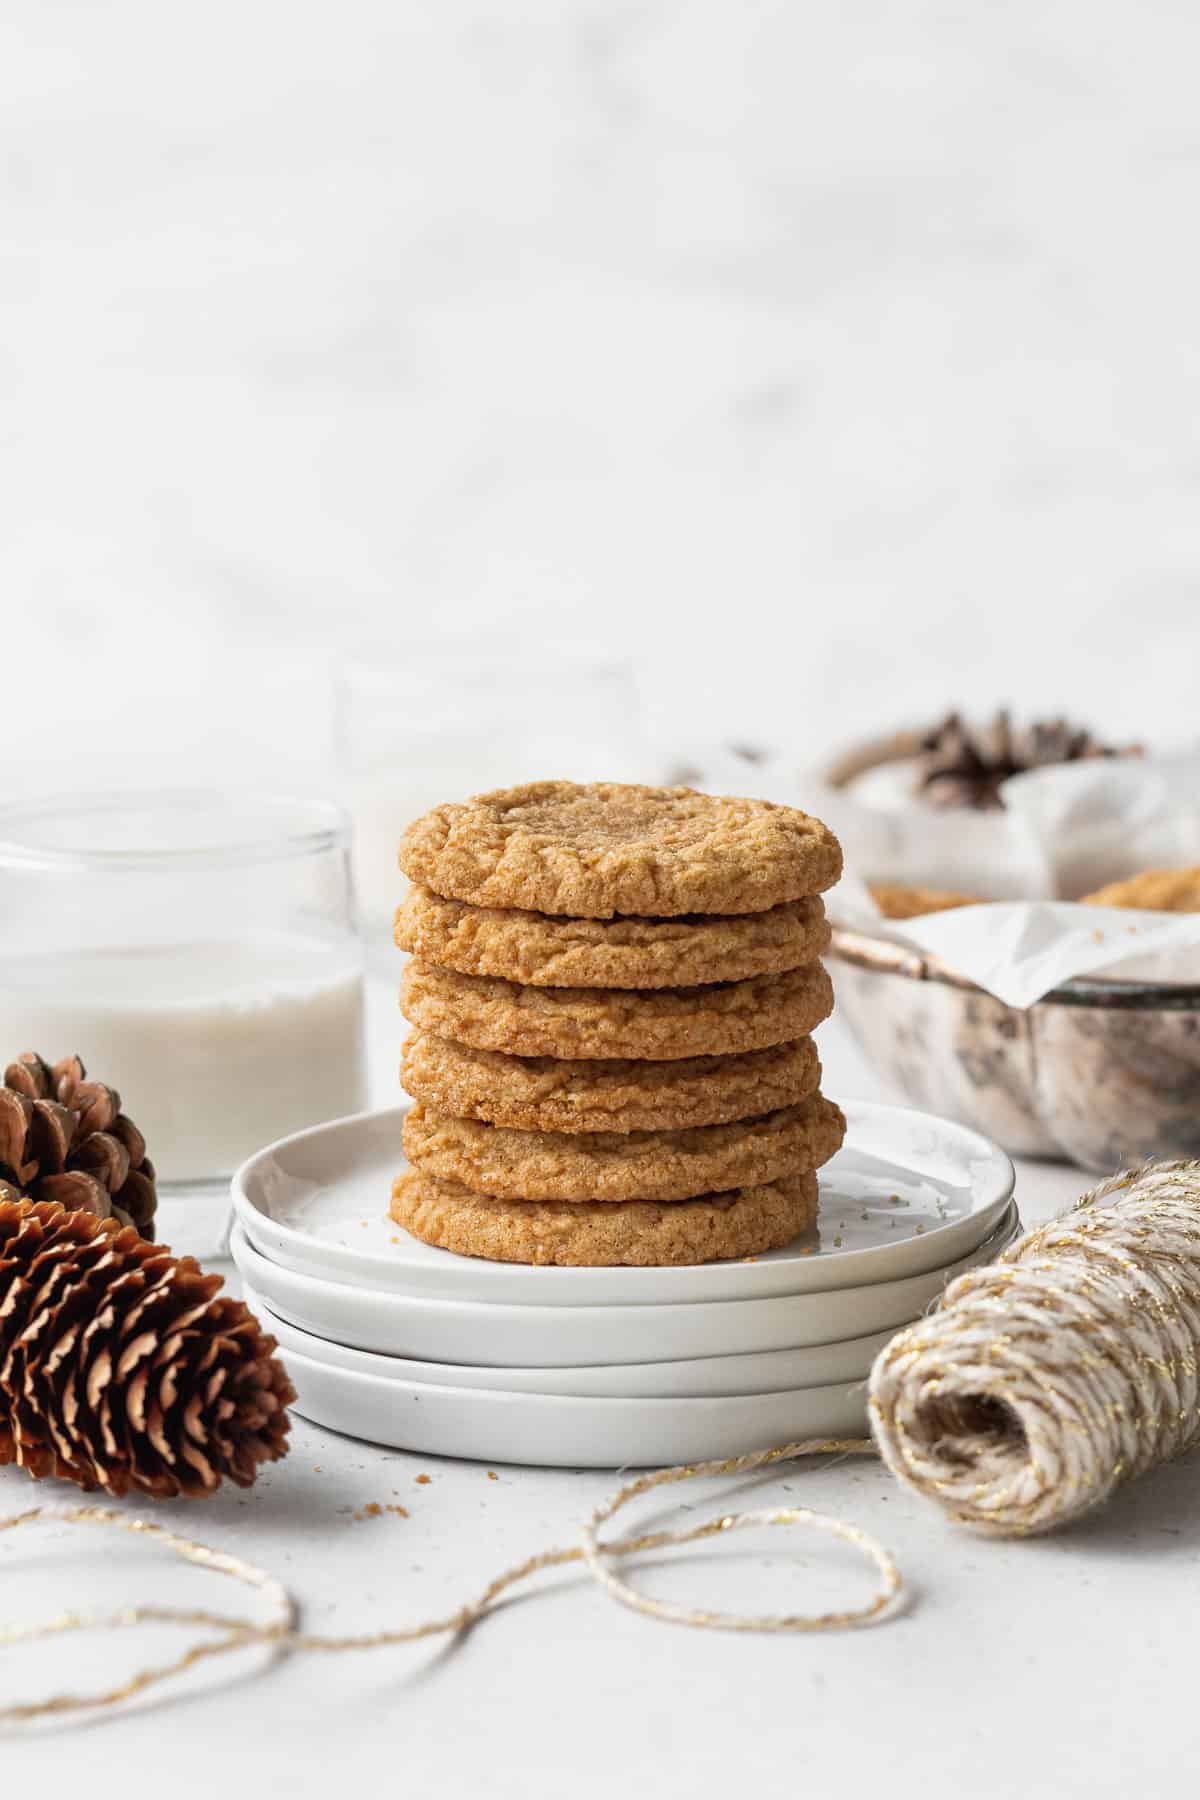 A stack of ginger cookies on white plates.